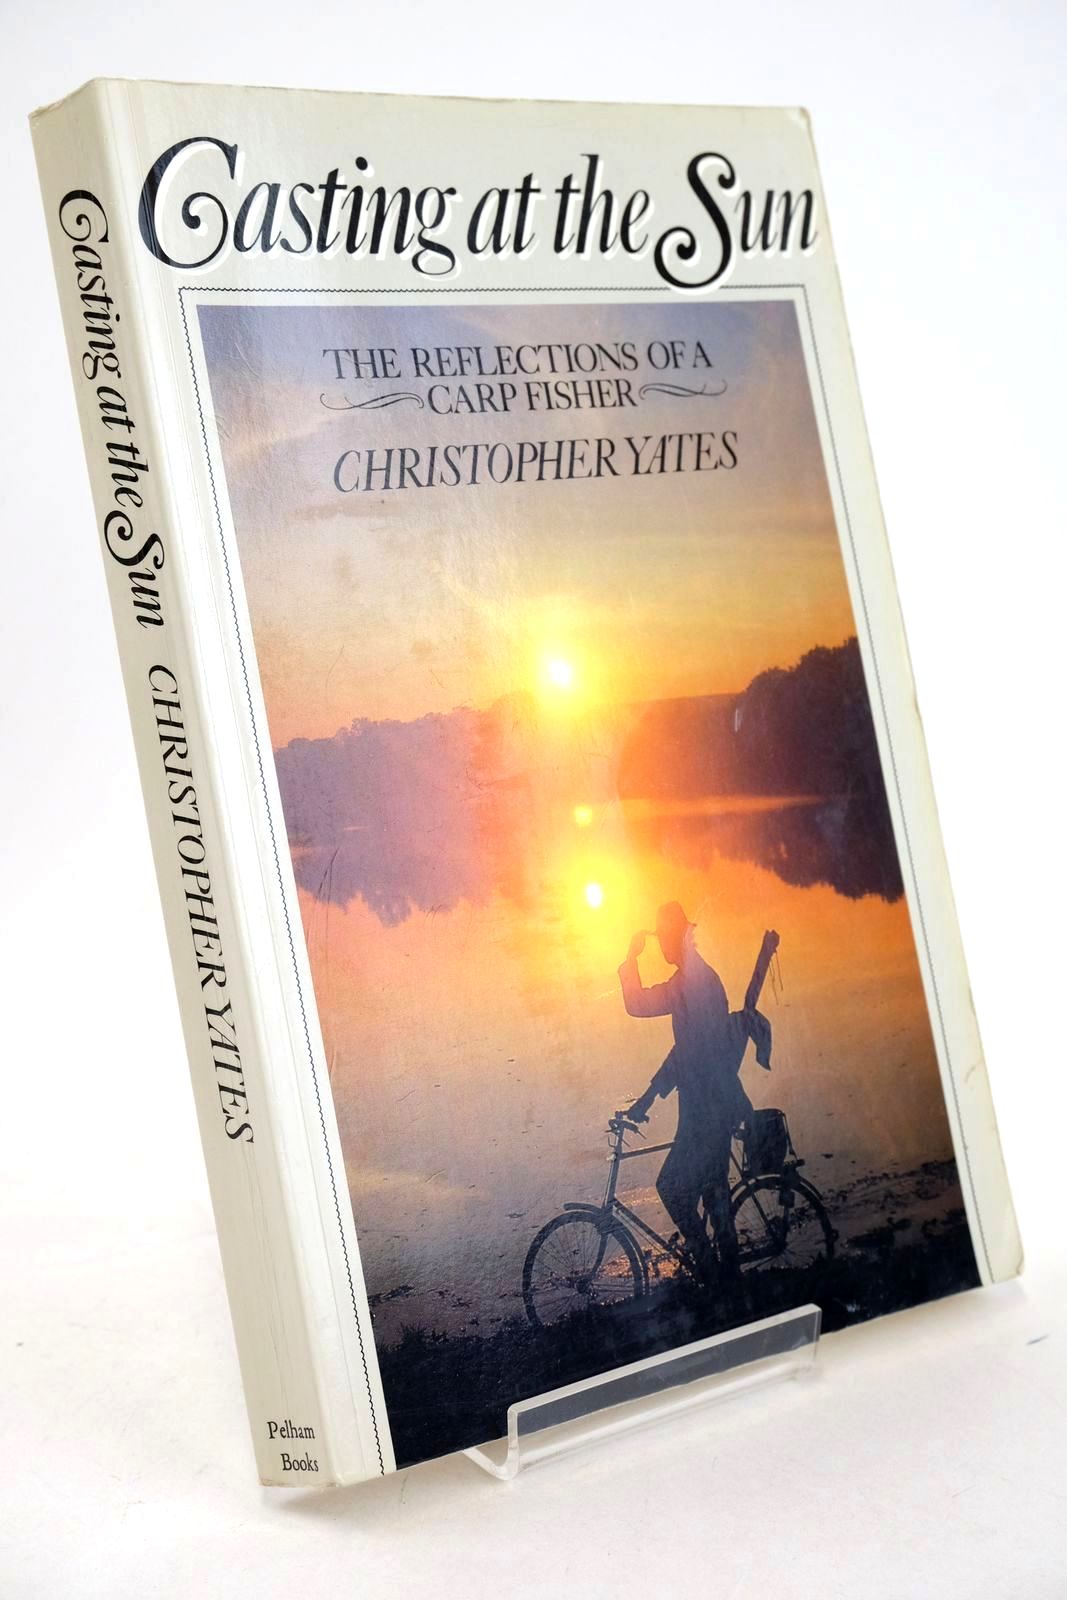 Photo of CASTING AT THE SUN: THE REFLECTIONS OF A CARP FISHER written by Yates, Christopher published by Pelham Books (STOCK CODE: 1327603)  for sale by Stella & Rose's Books